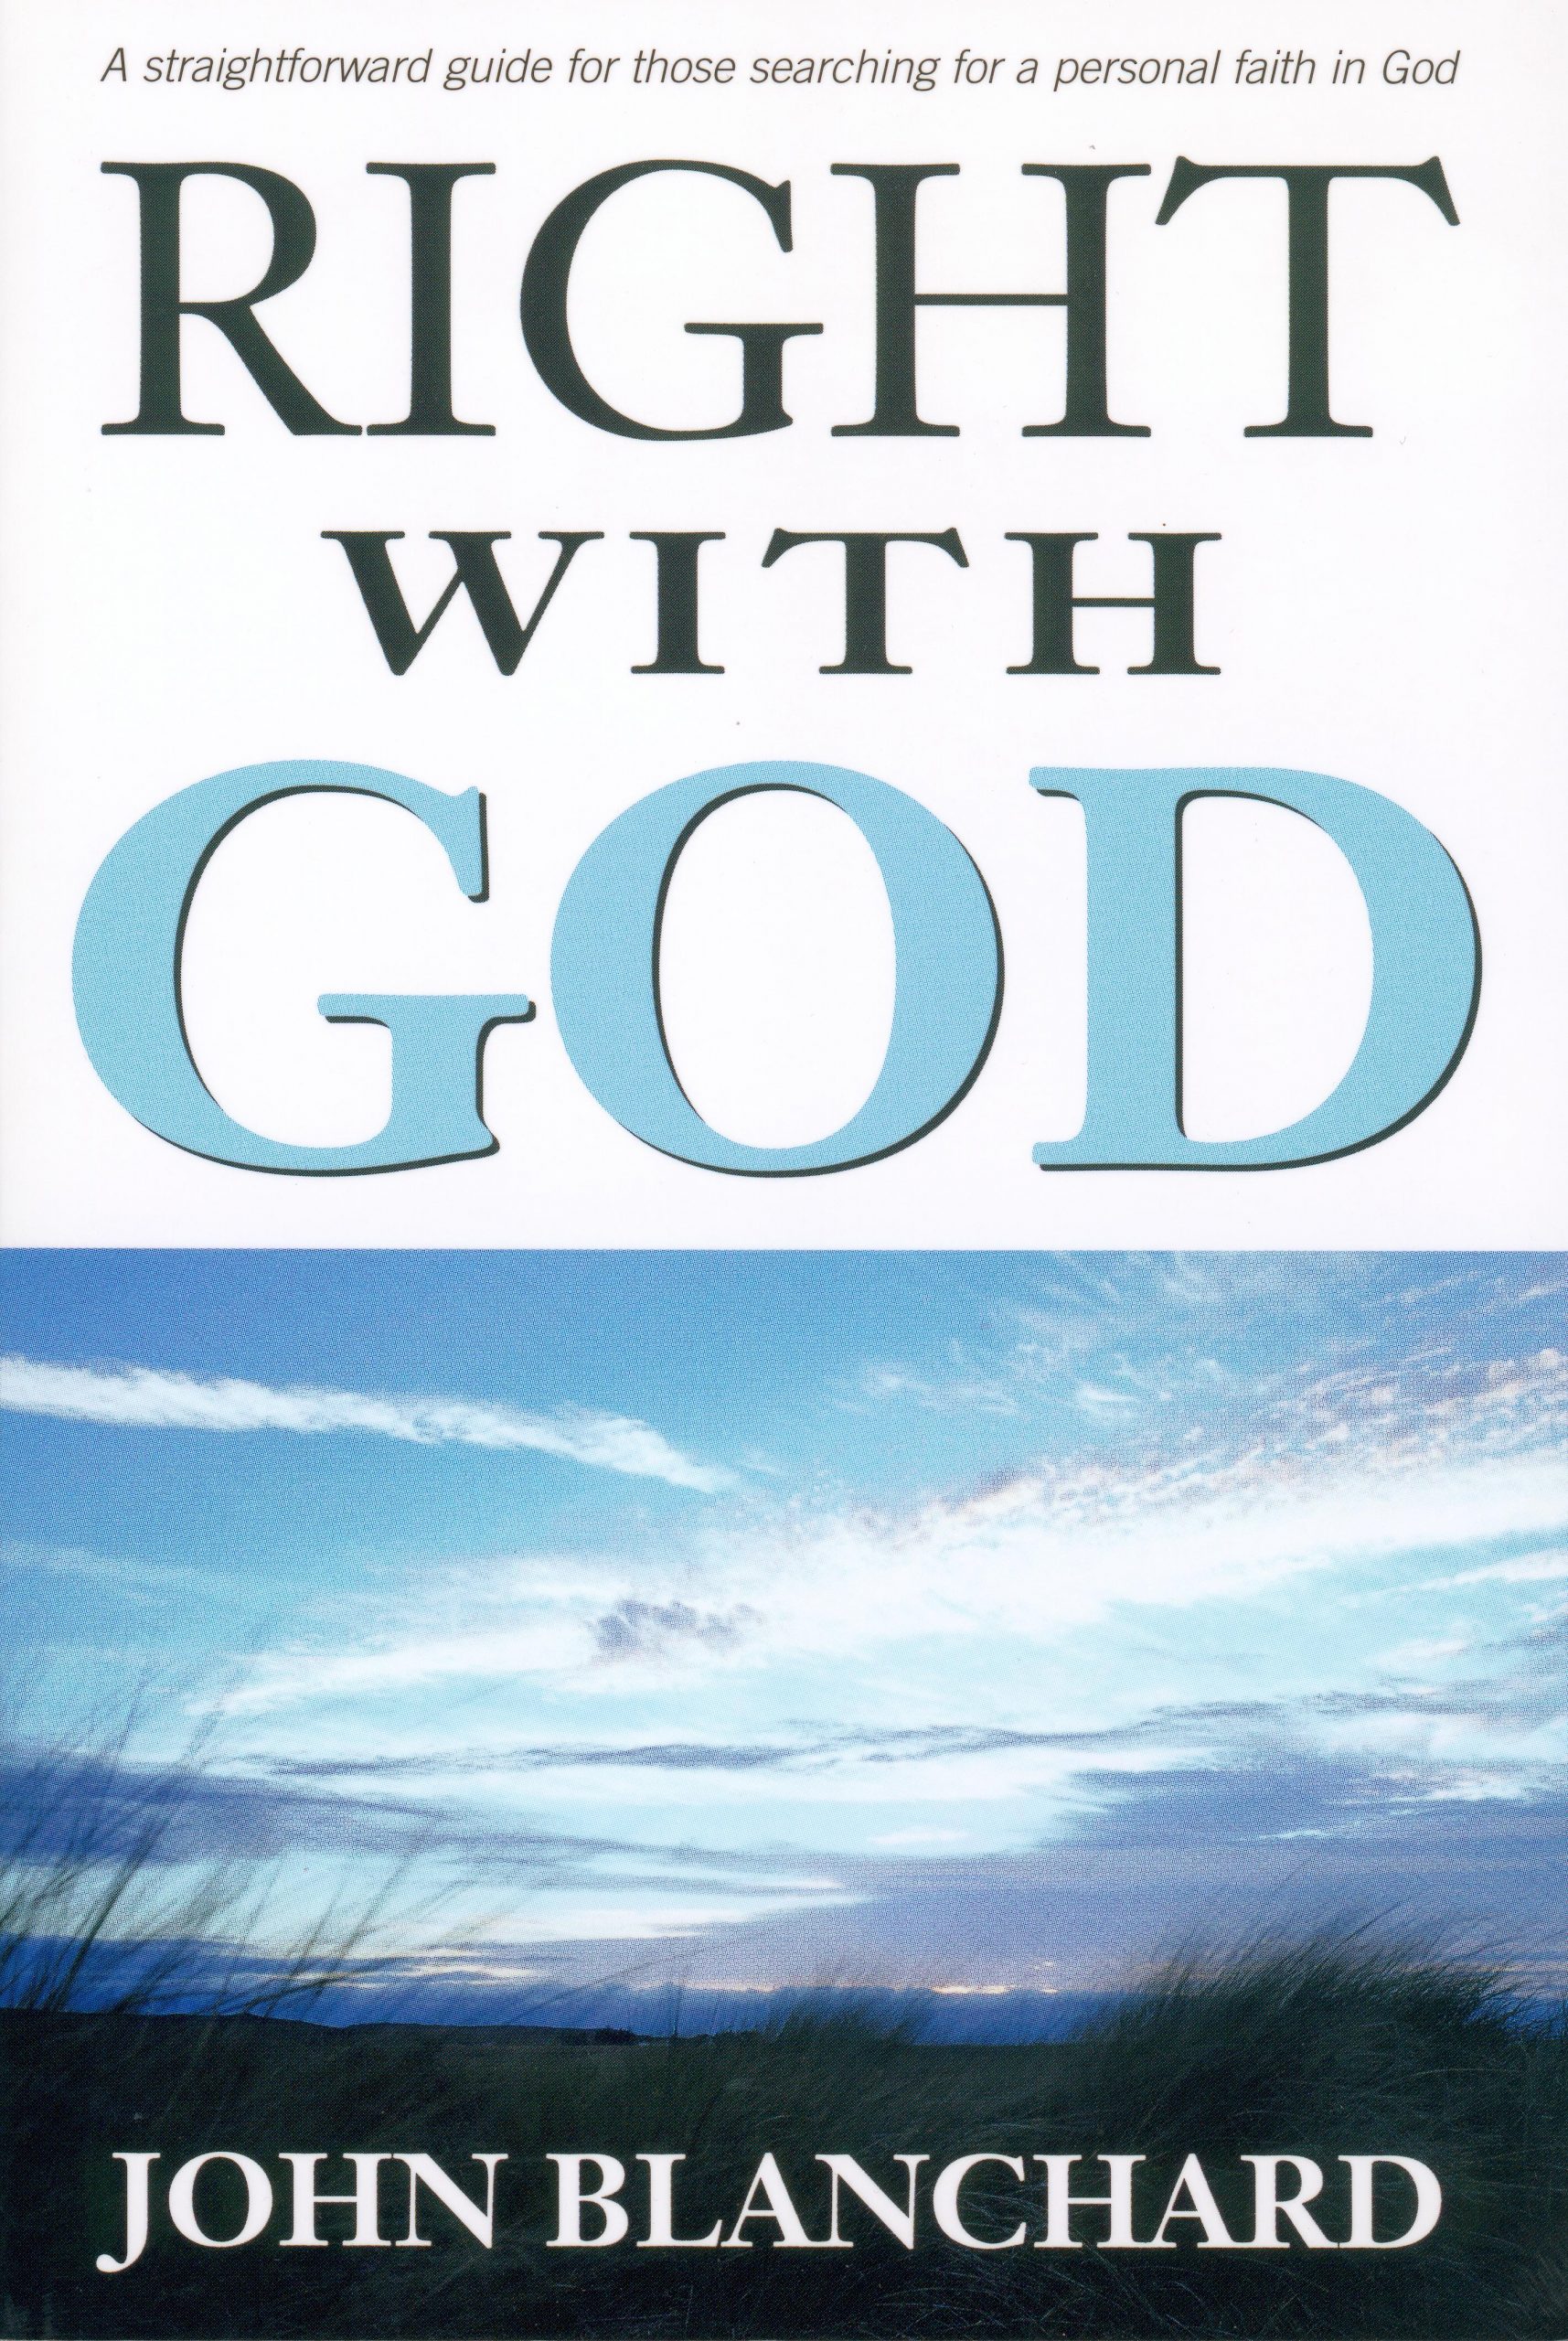 Right with God by John Blanchard